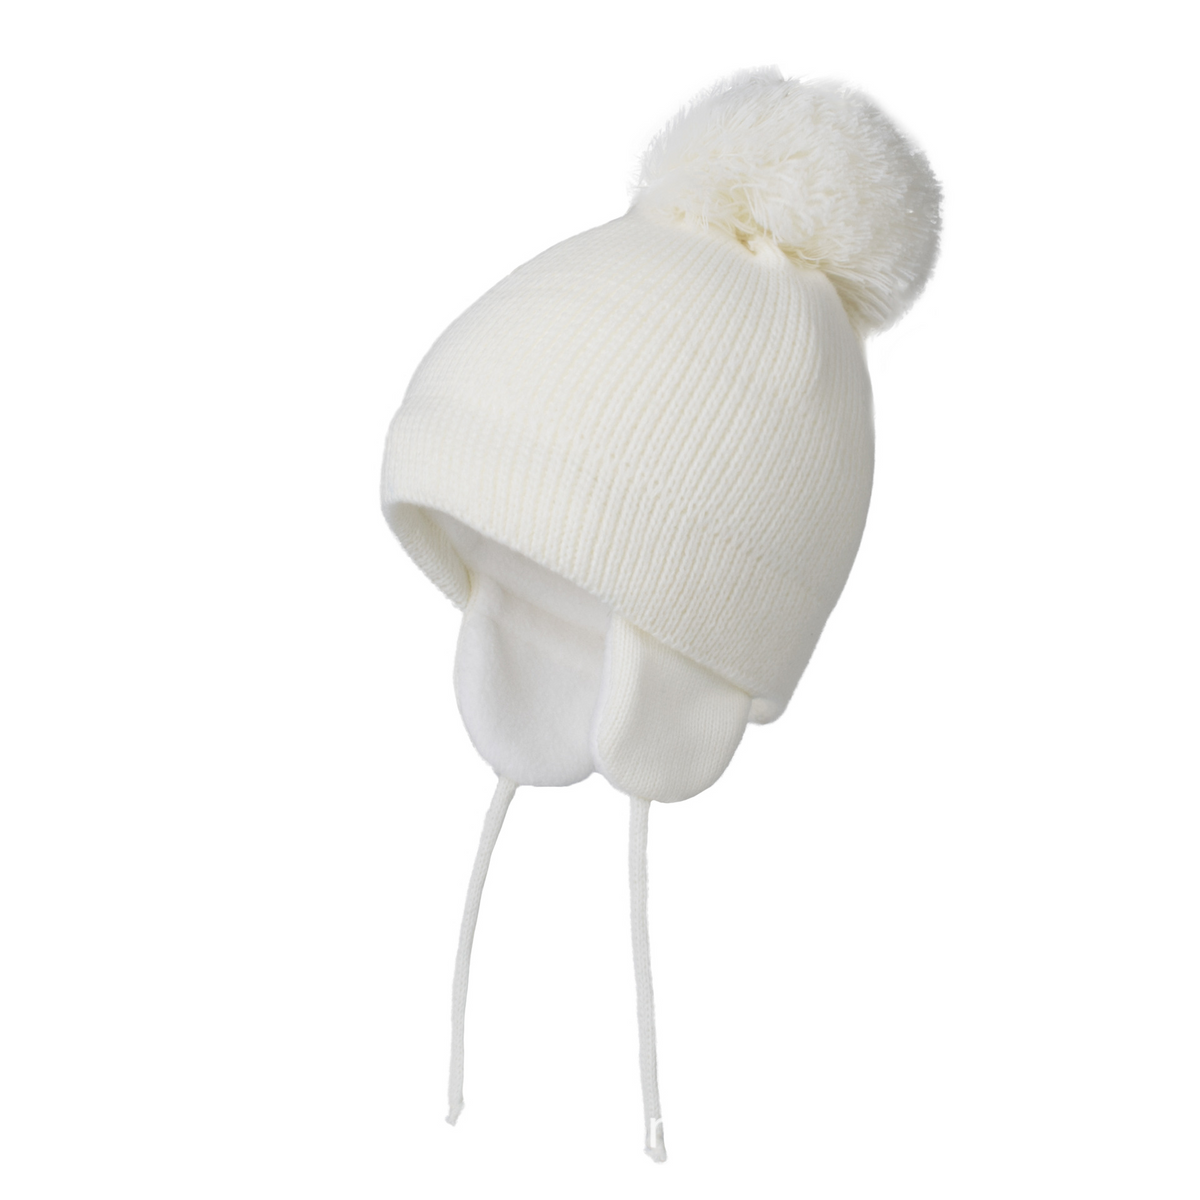 Knitted Pom Winter Hat